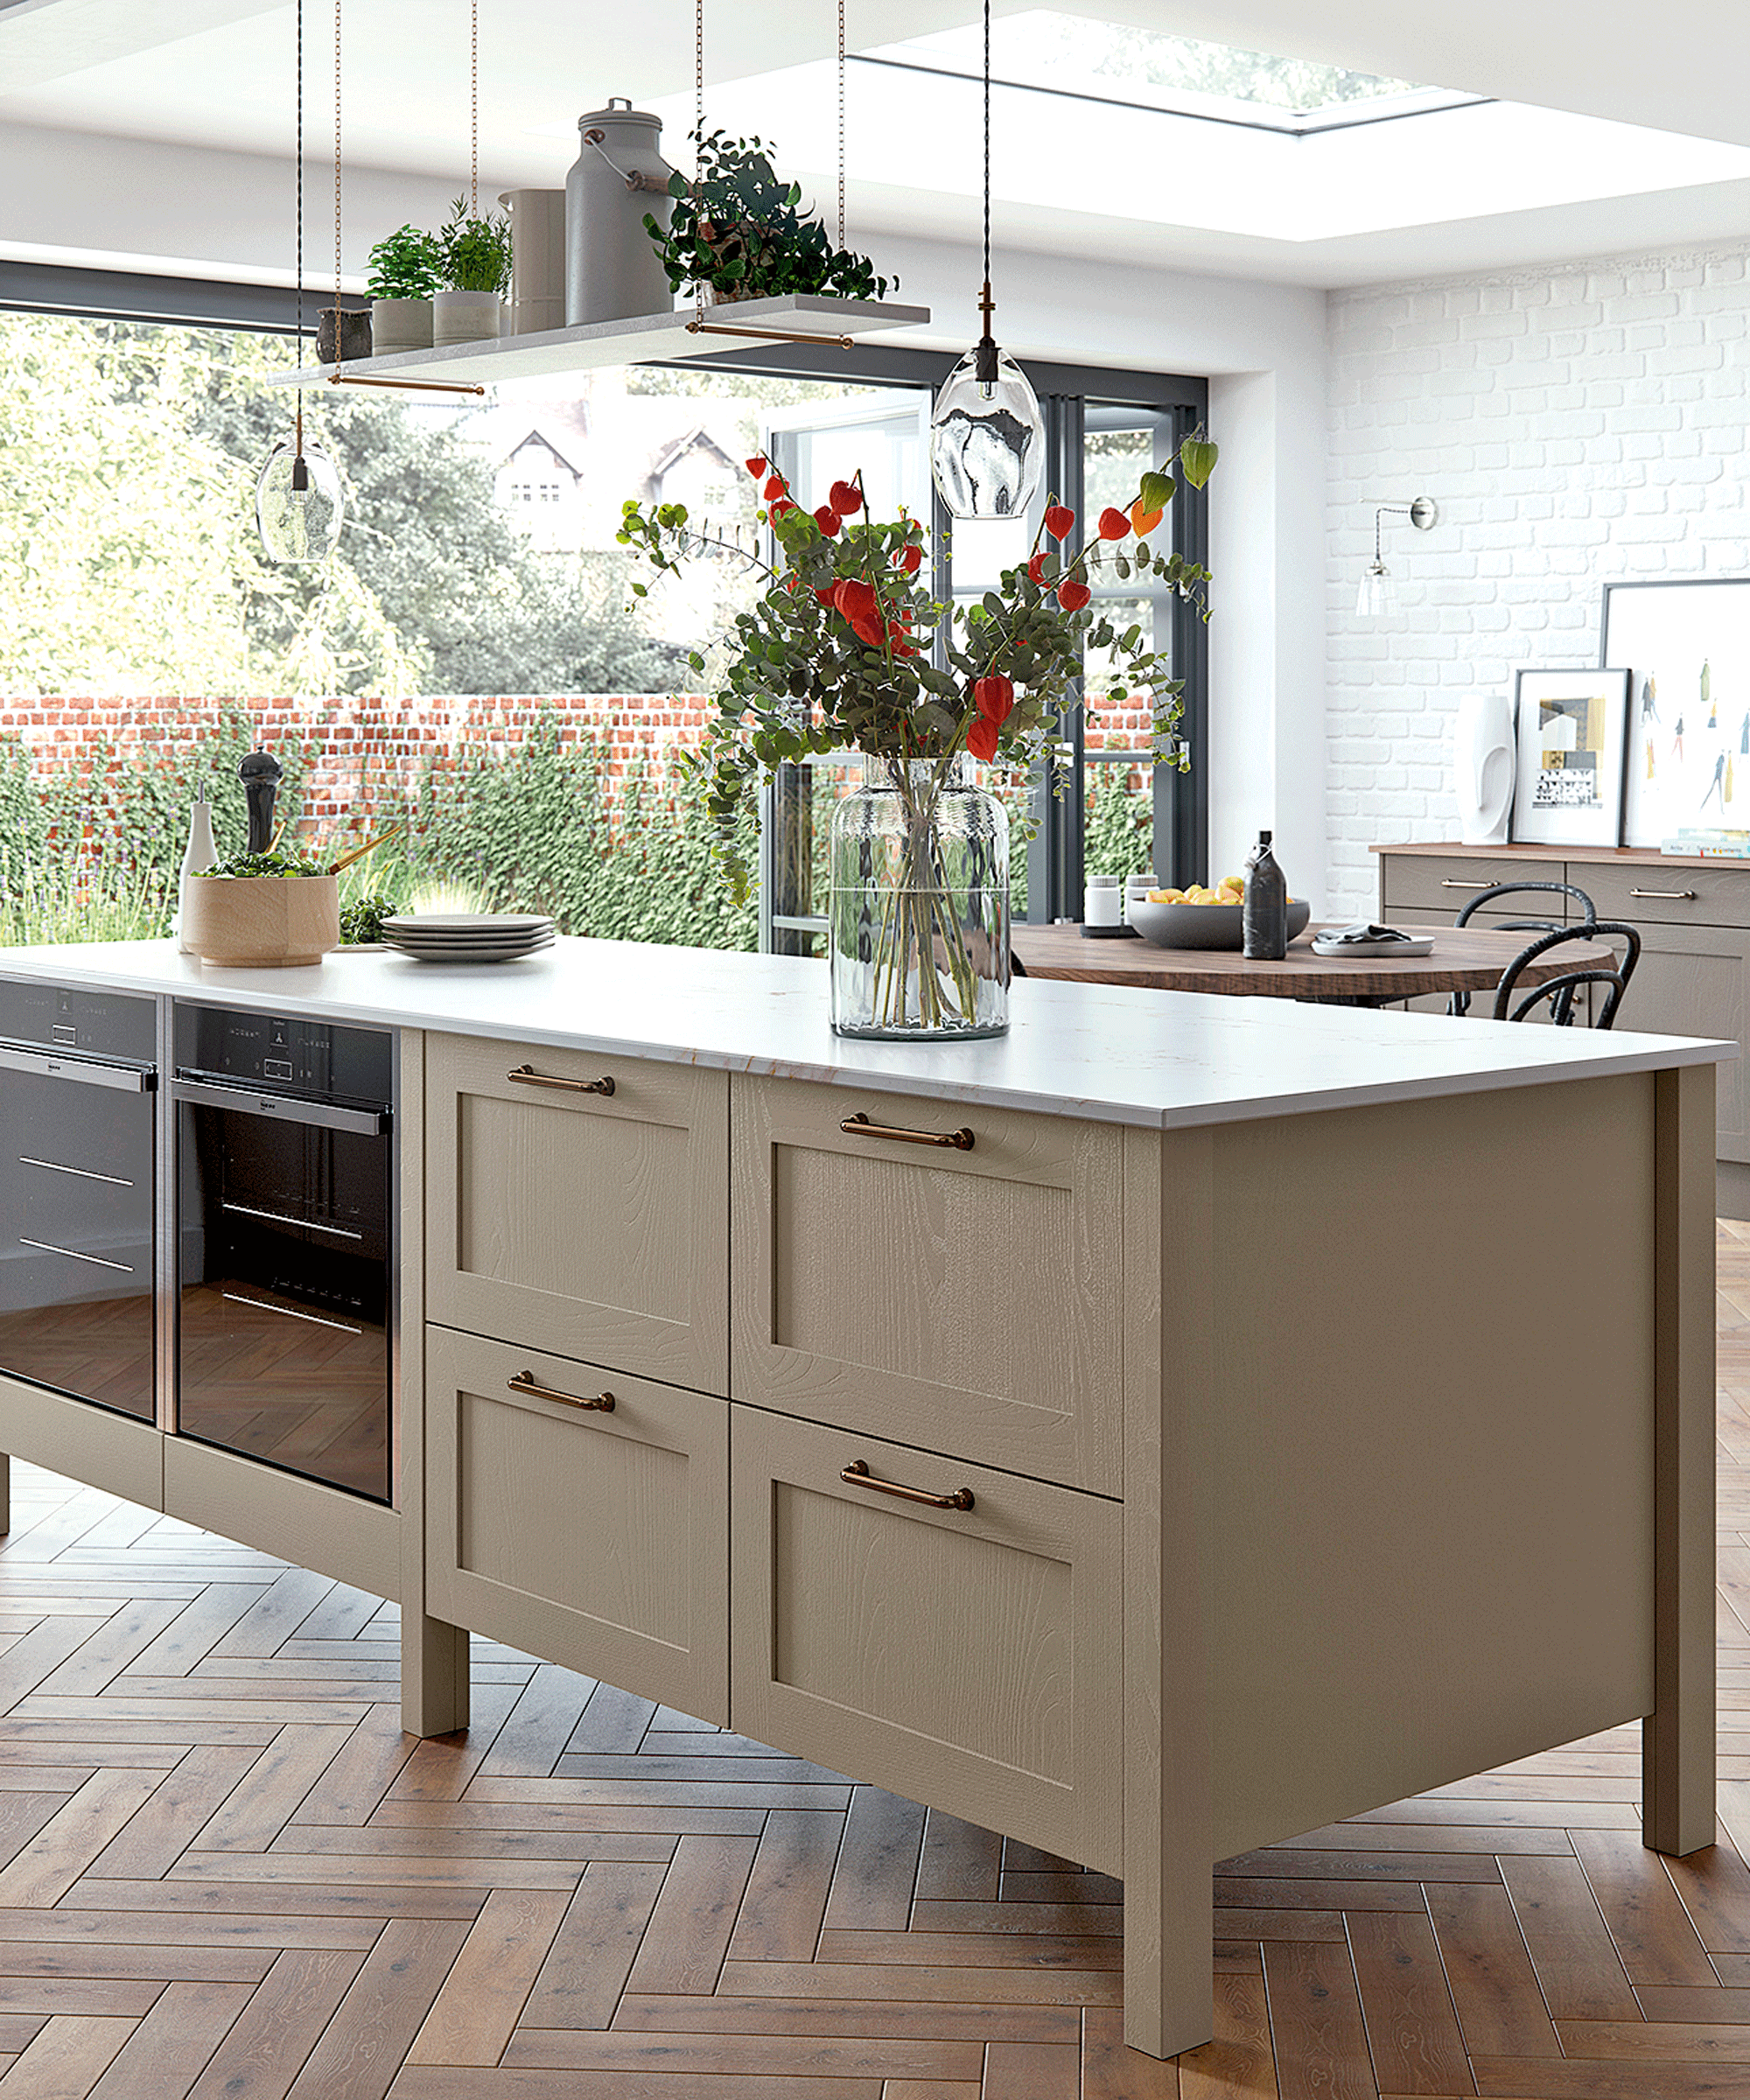 An example of freestanding kitchens showing a neutral kitchen island on legs with herringbone flooring